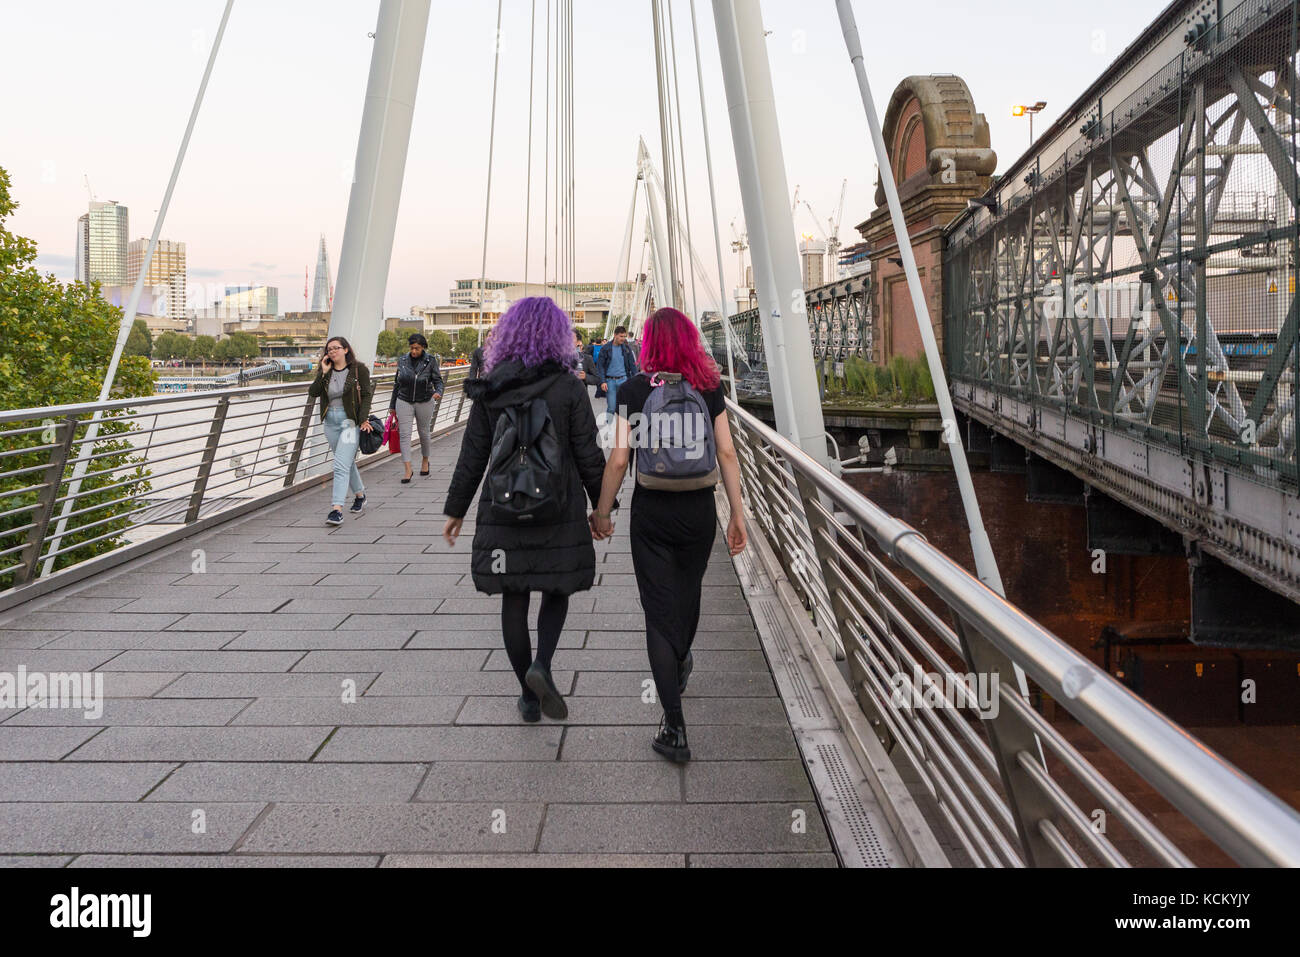 Two girls with red and purple hair holding hands, London, England, UK Stock Photo